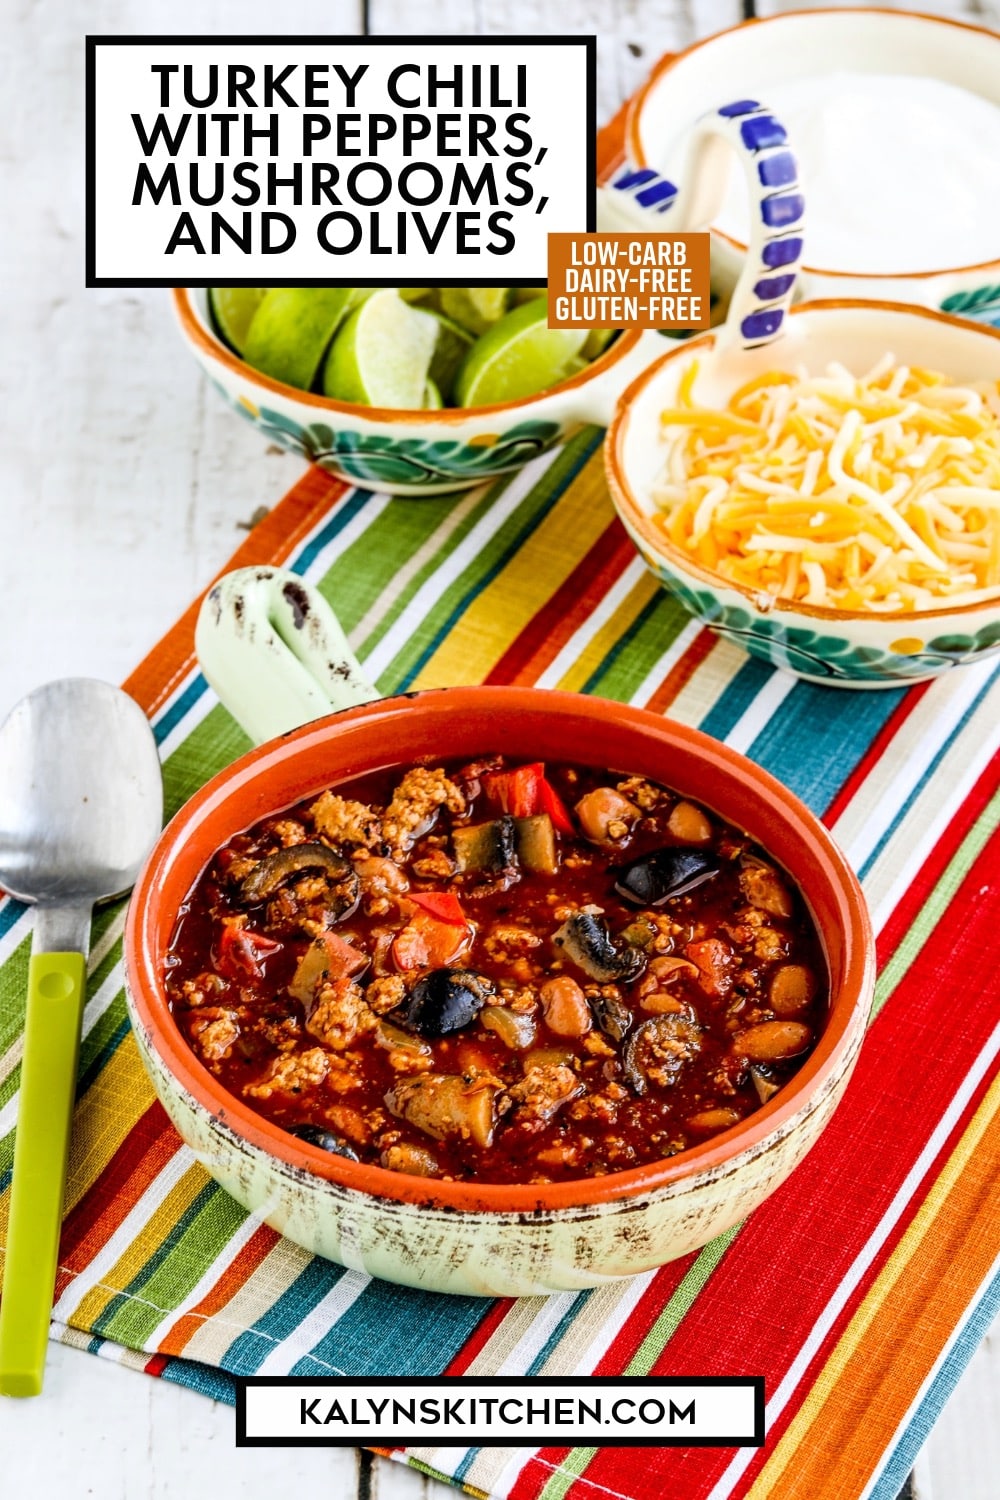 Pinterest image of Turkey Chili with Peppers, Mushrooms, and Olives